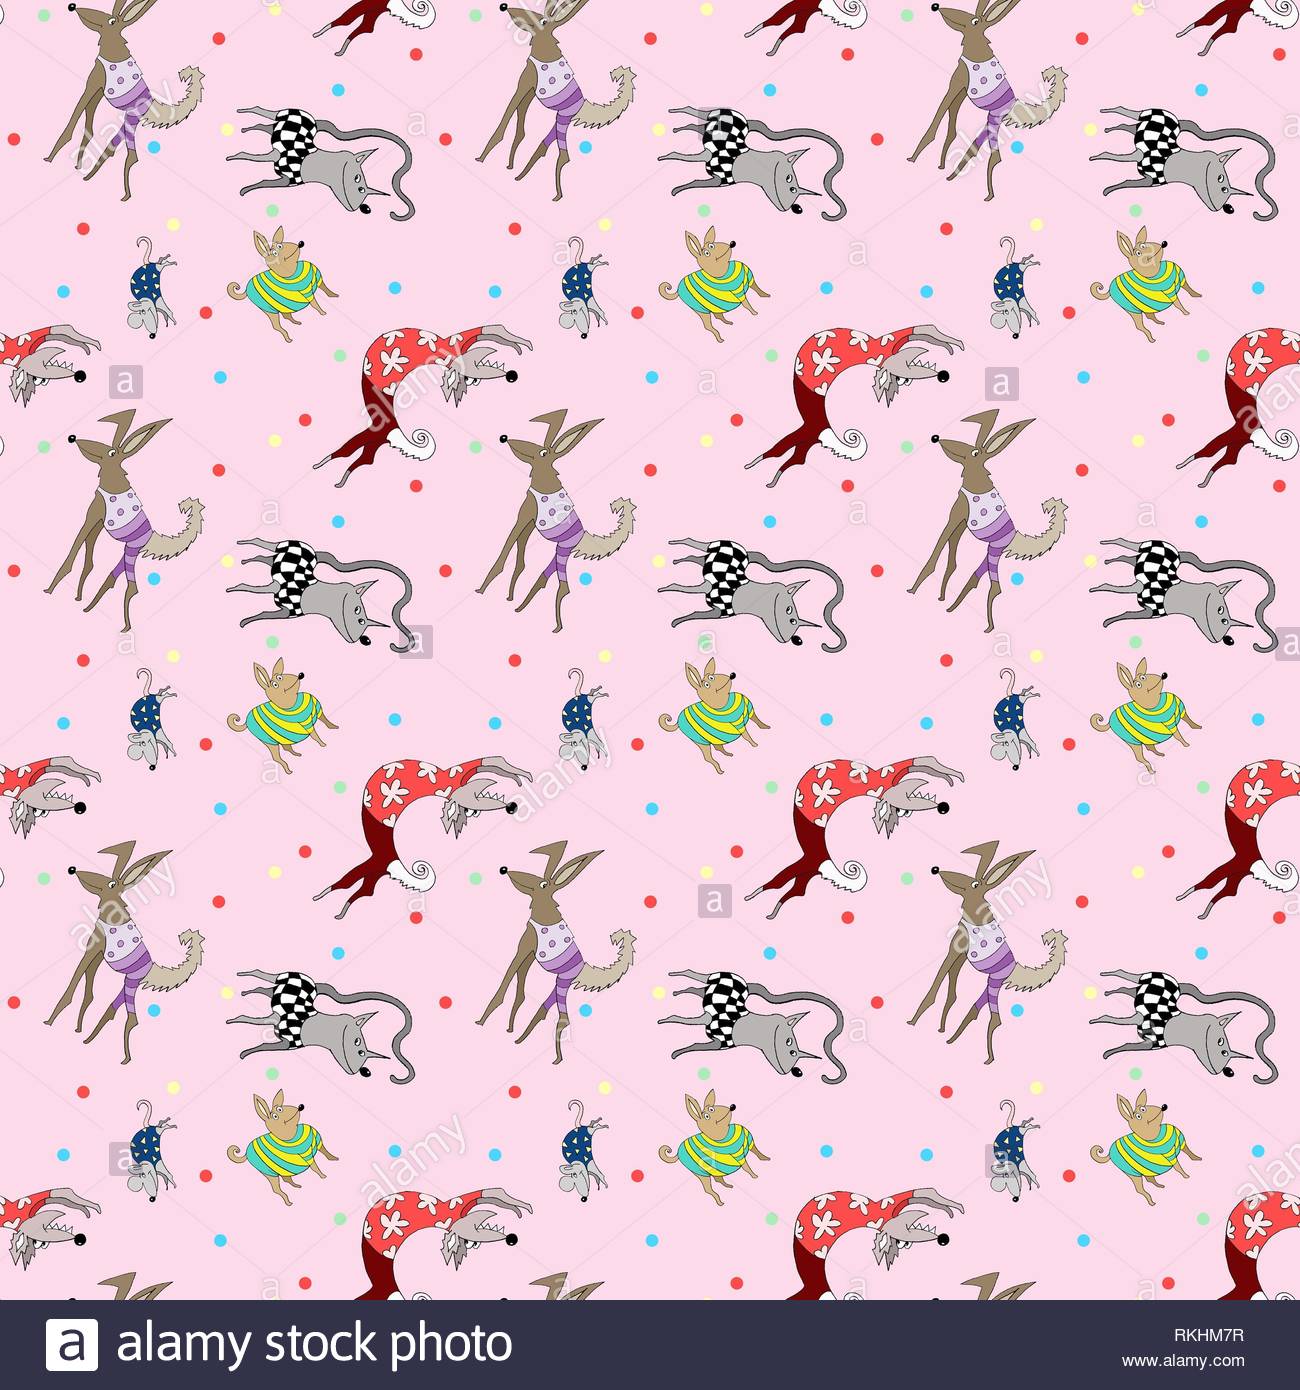 Wallpaper wrapping paper seamless pattern crazy animals dog